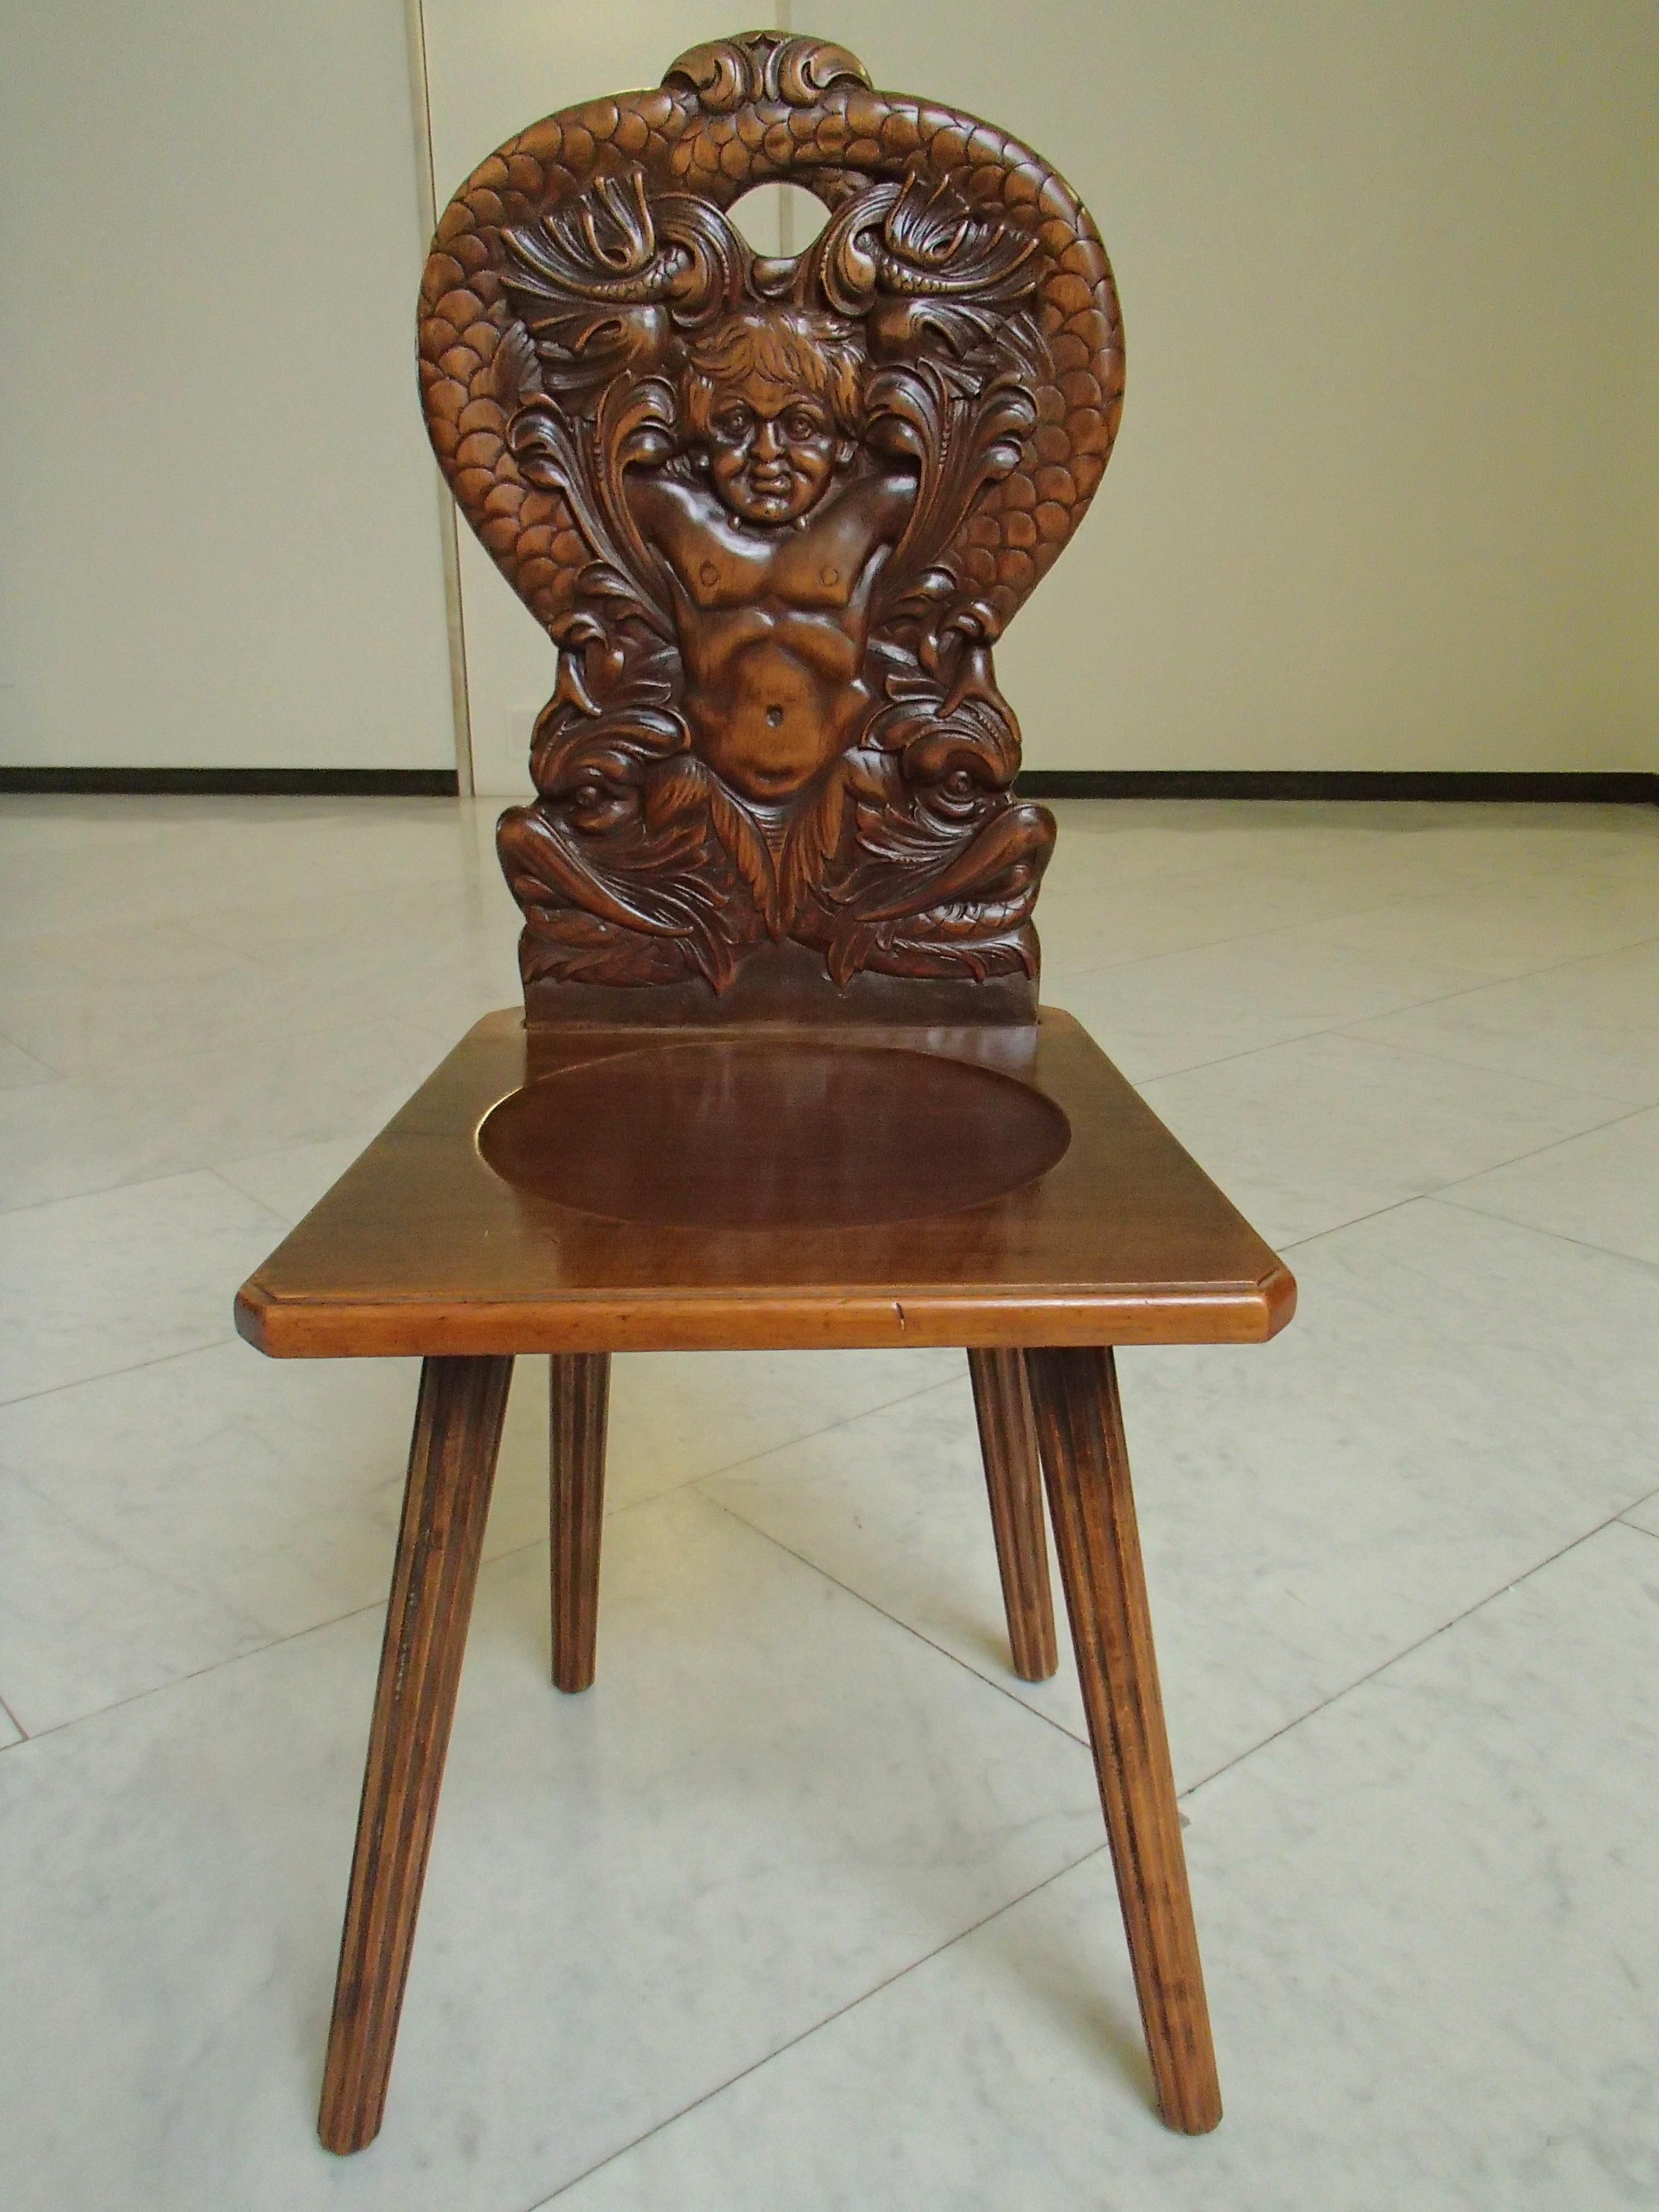 Pair of Brutalist Wooden Chairs Carved with Fabulous Creatures - Dragons 2